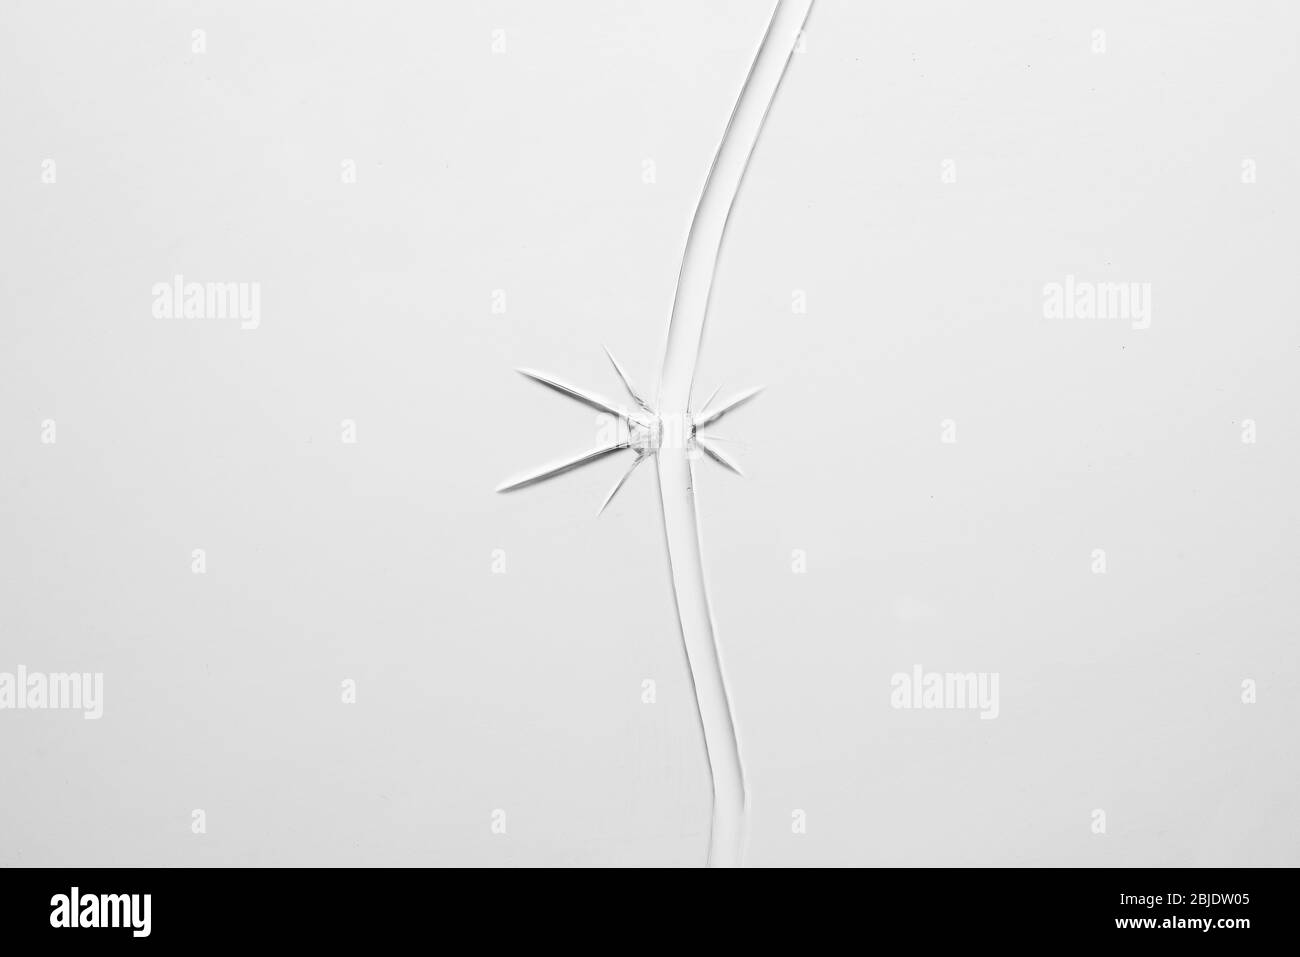 Broken glass. Transparent shards on a white background. Stock Photo